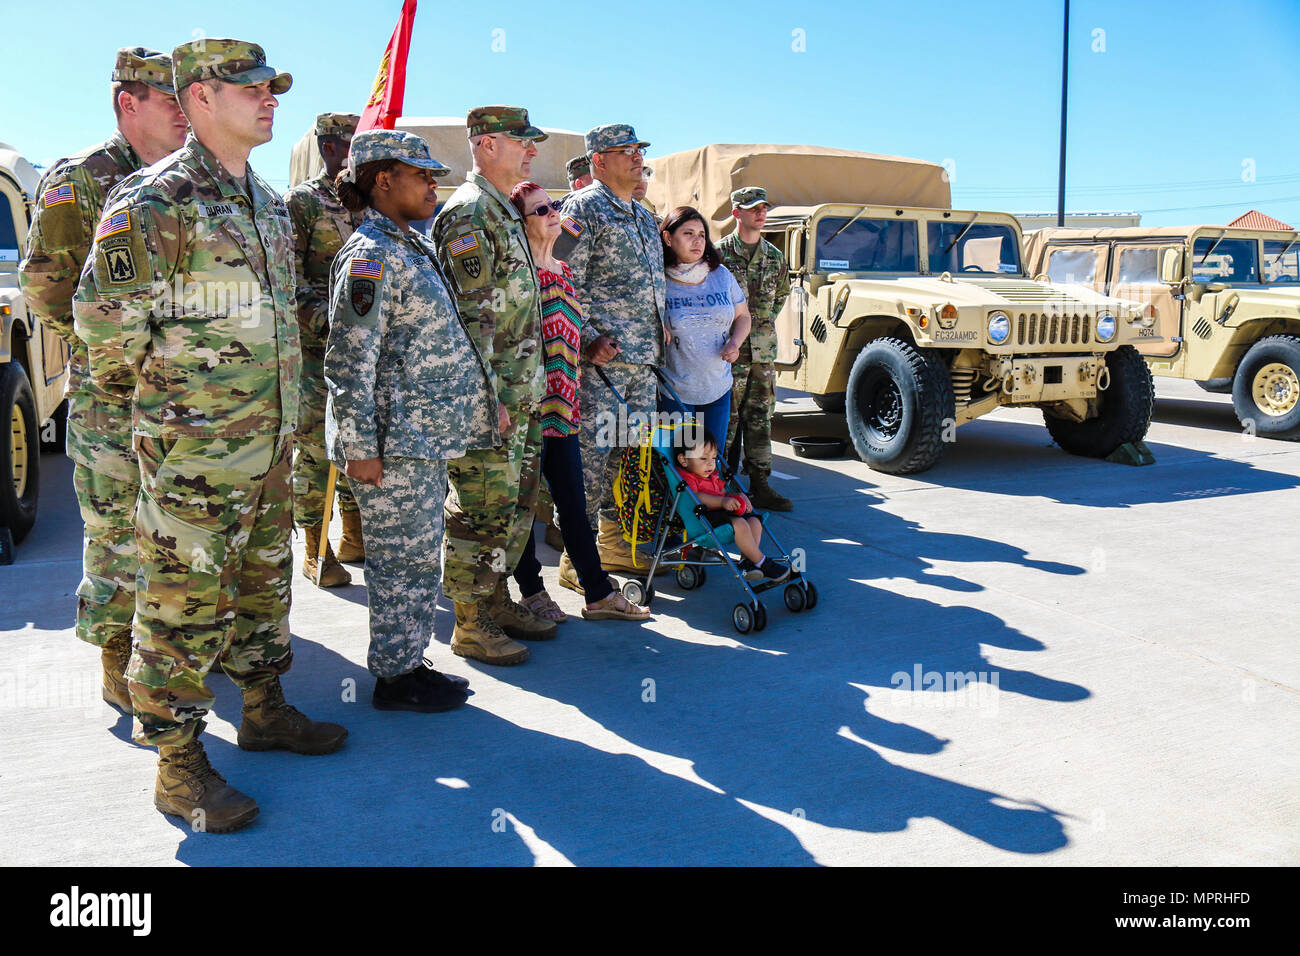 Leaders come together at Headquarters and Headquarters Battery, 32nd Army Air and Missile Defense Command, Fort Bliss, Texas, to assist families April 6, 2017. The goal is to stay ready by assisting families inside and outside the unit’s element. (U.S. Army photo by Sgt. Aura E. Conejos, 32d AAMDC Public Affairs) Stock Photo